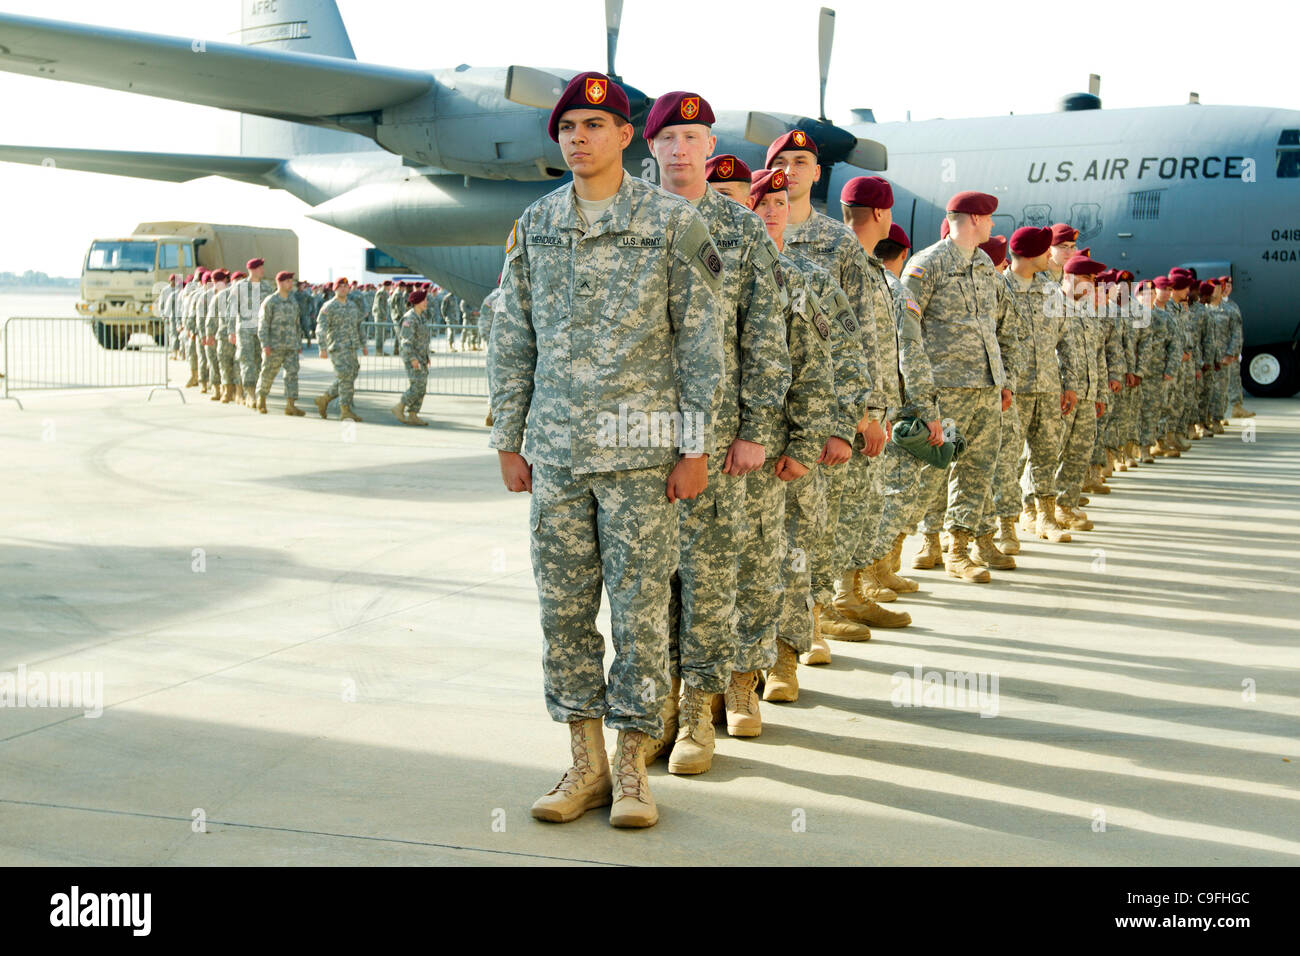 DECEMBER 14 2011 - Troops line up before PRESIDENT OBAMA speaks at Fort Bragg, NC, to mark the withdrawal all forces from Iraq by the end of the month.  The President's speech featured grateful thanks to American troops for their service in Iraq as the United States prepares to withdrawal all forces Stock Photo